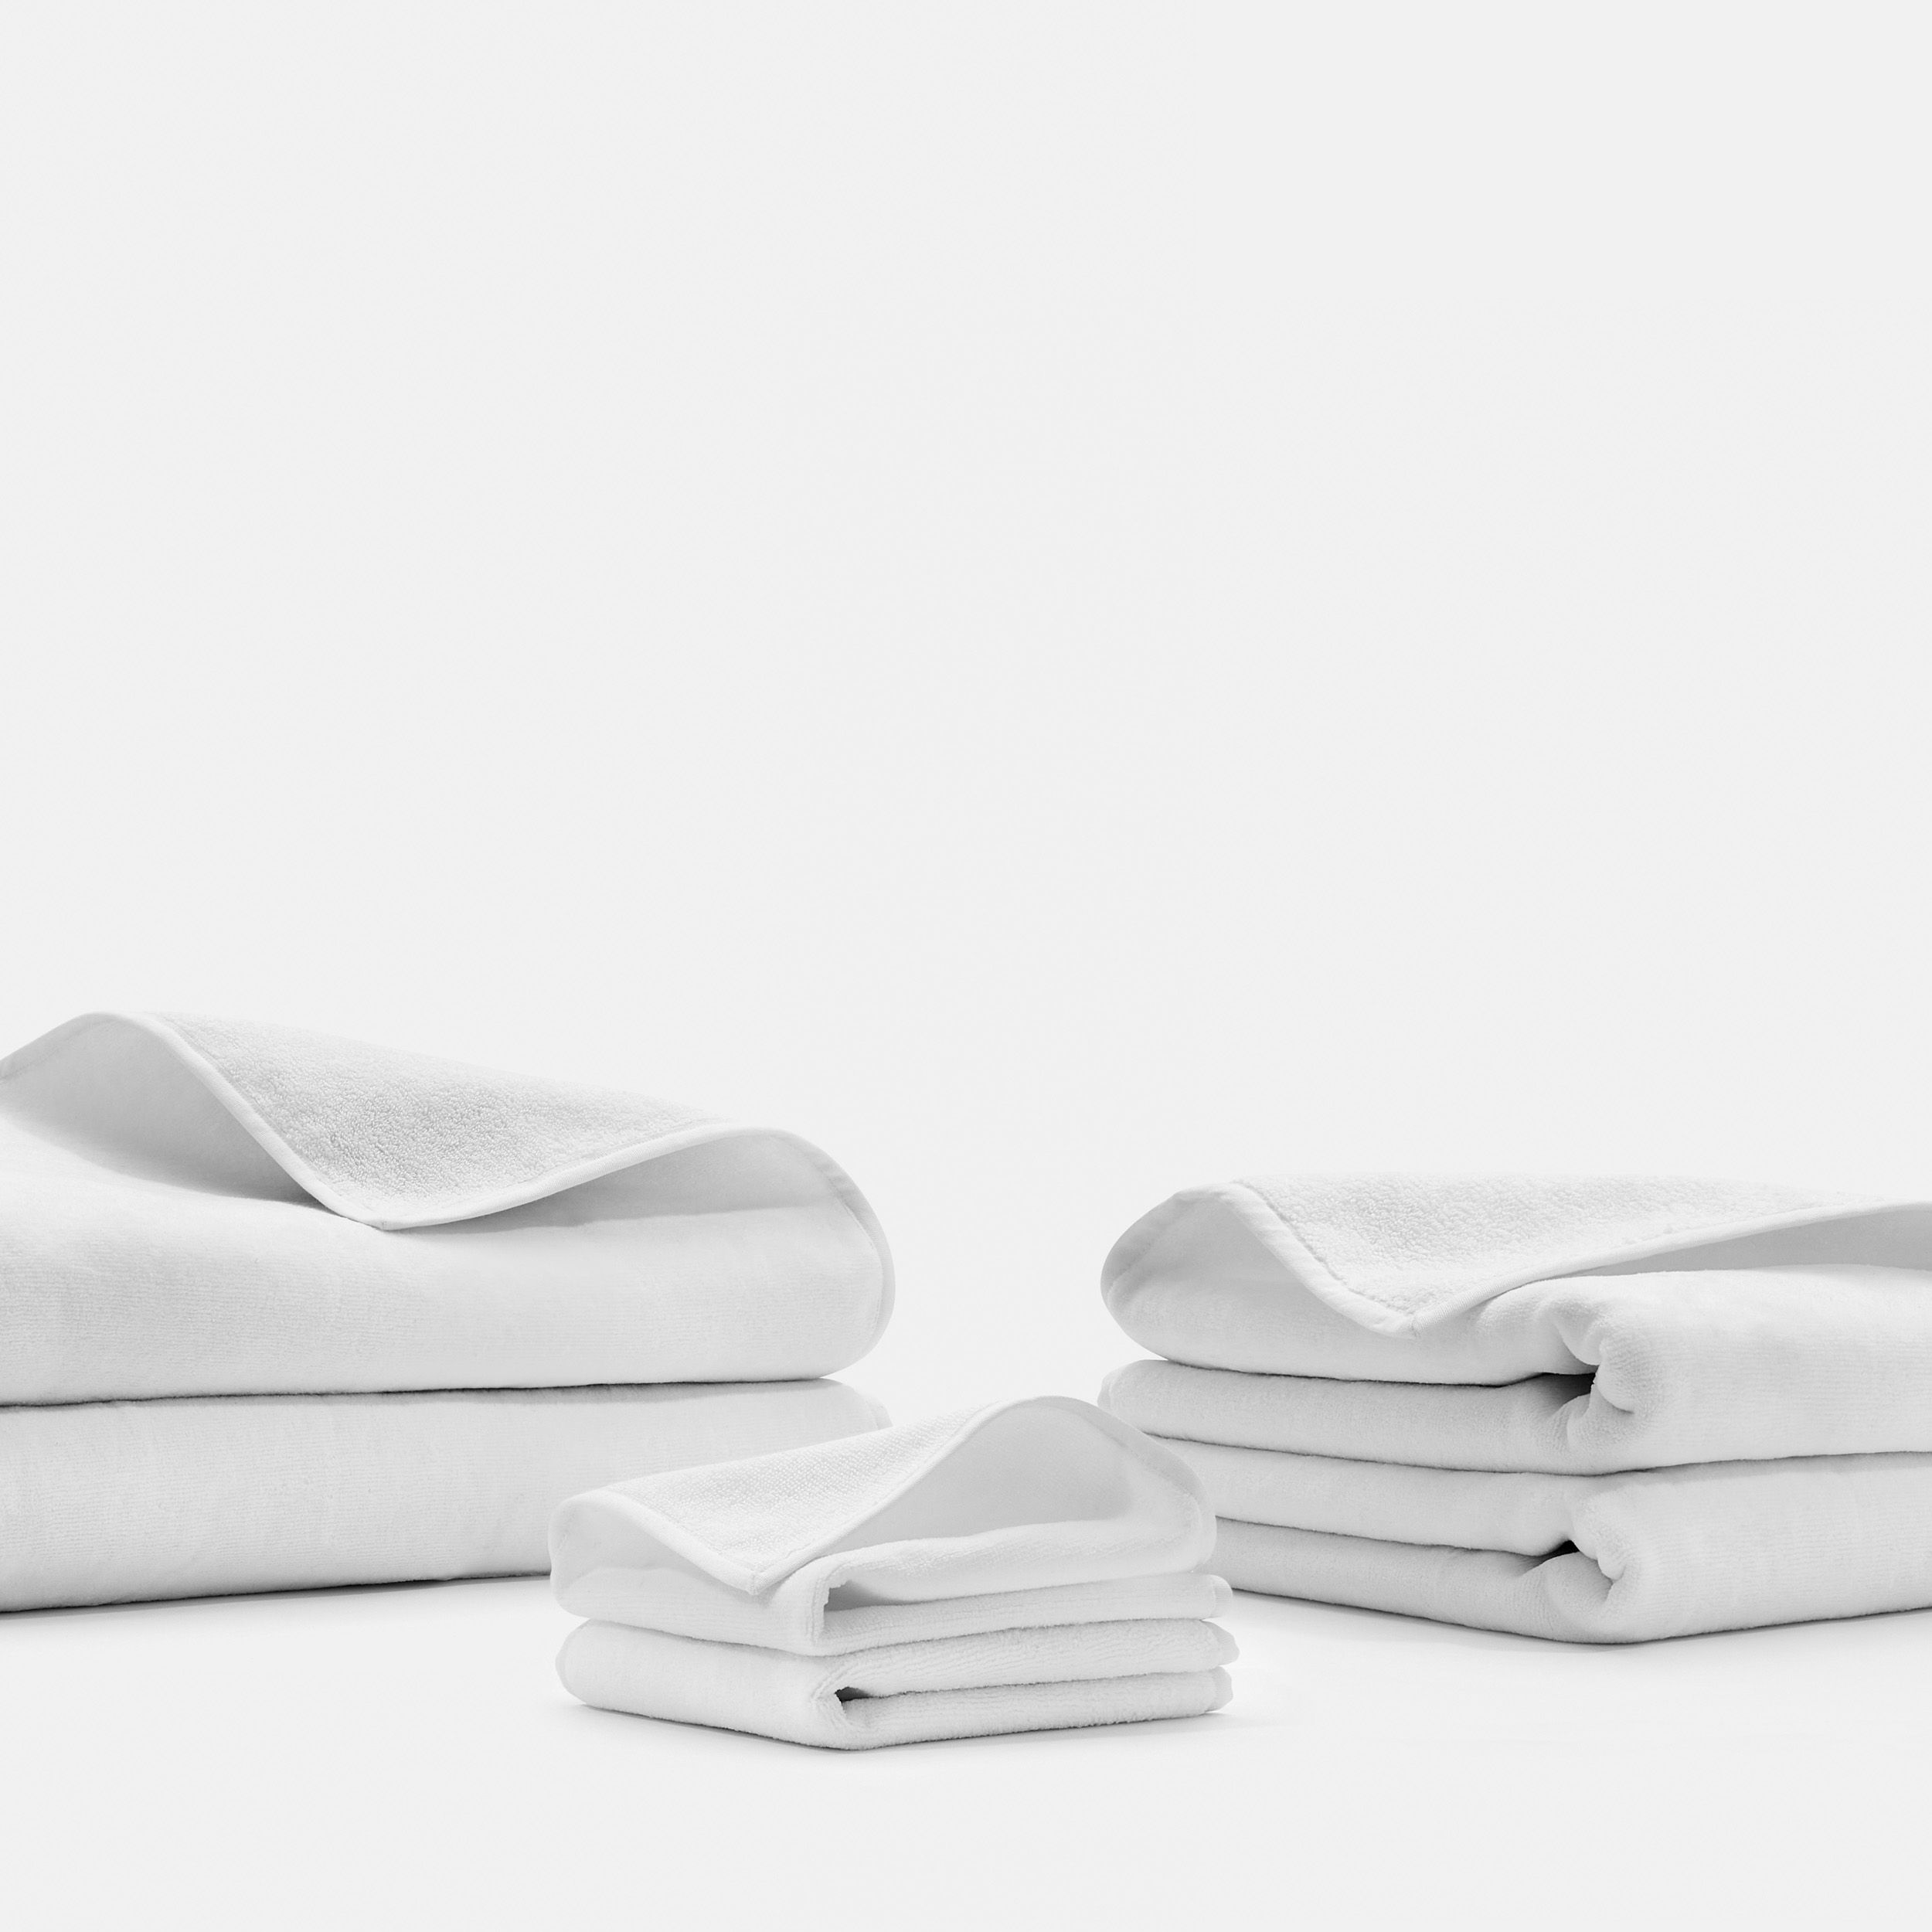 PROSSIONI® | A new era of luxury bedding, towels and bathrobes. | Prossioni